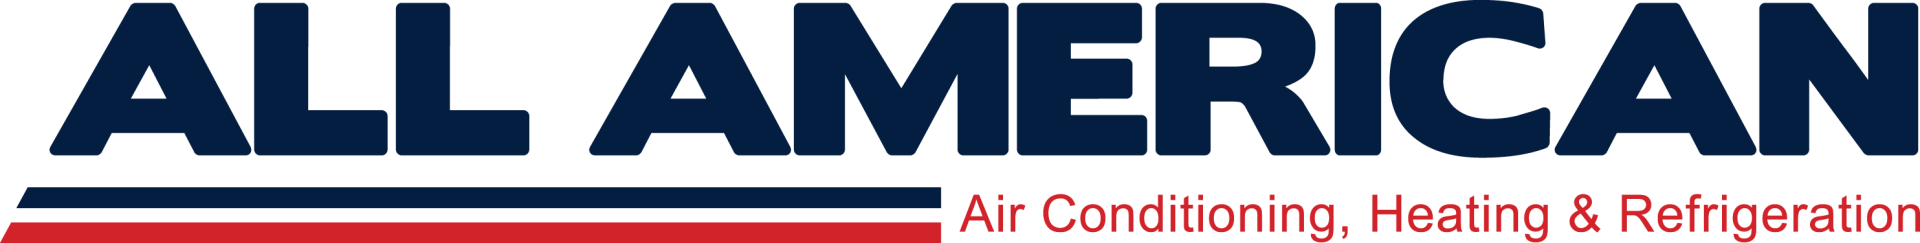 All American Air Conditioning, Heating & Refrigeration